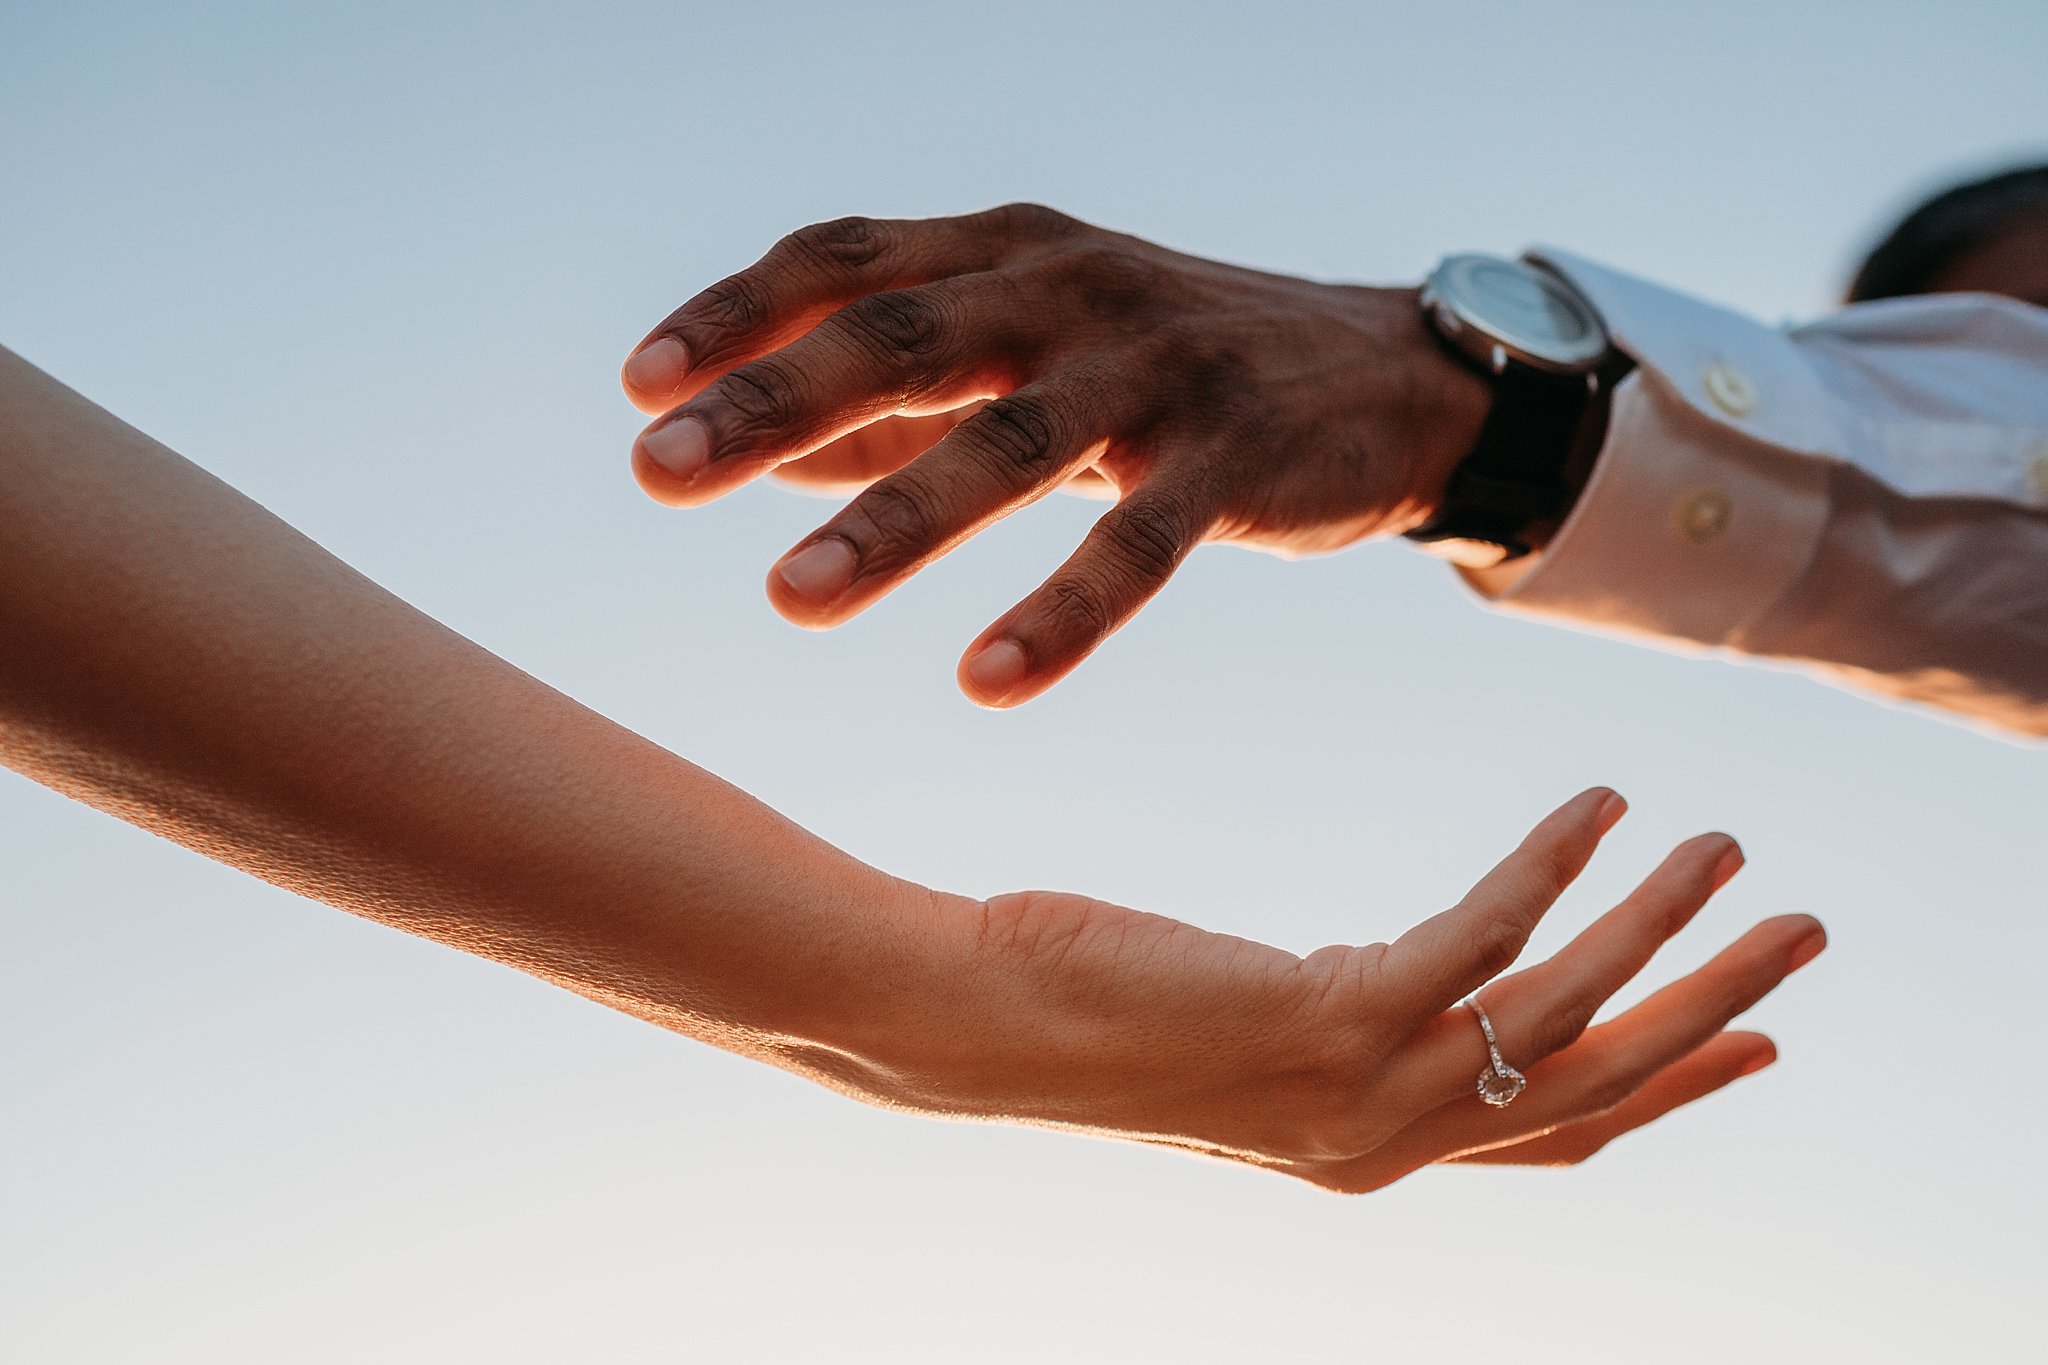 Image of hands reaching for each other. The woman's hand shows off her engagement ring.